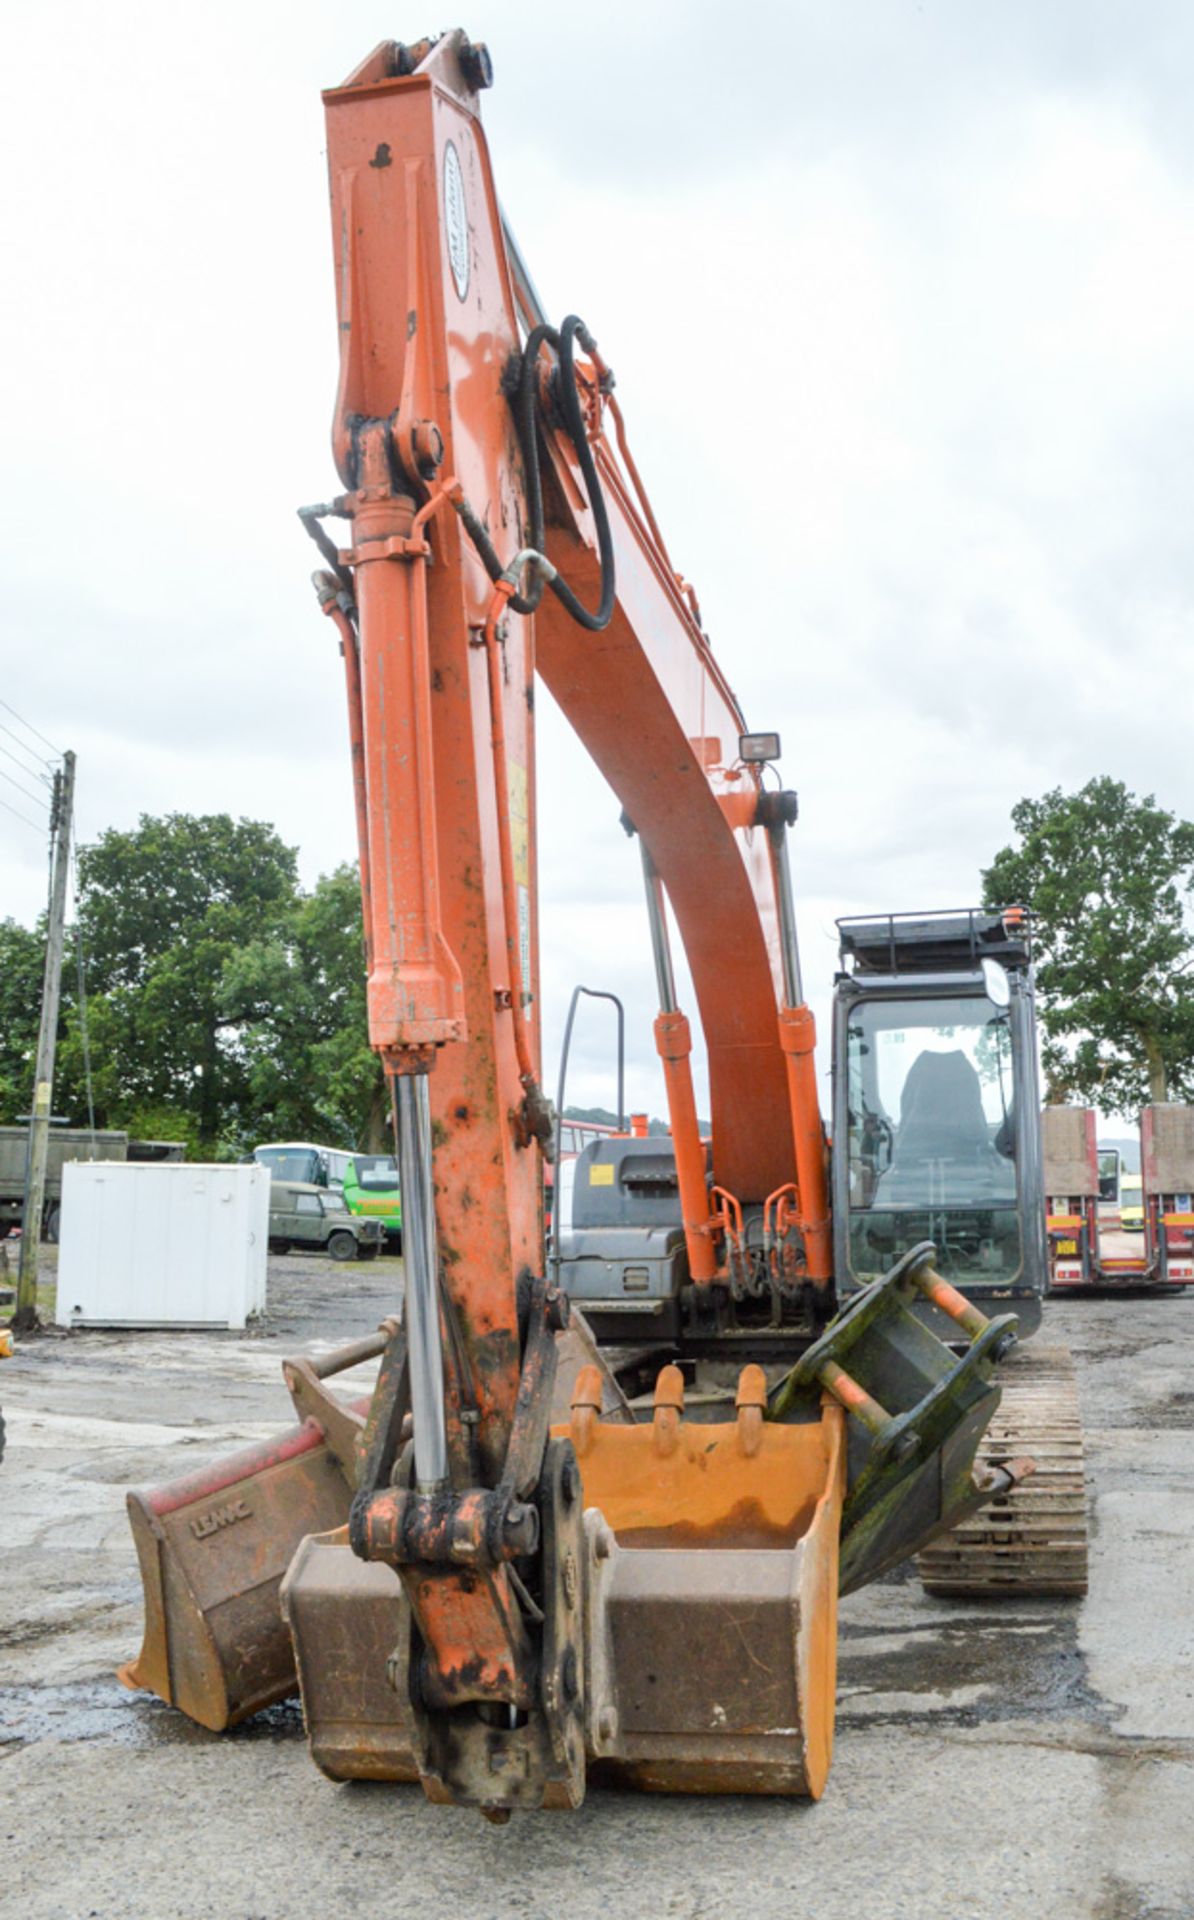 Hitachi Zaxis 210LC 21 tonne steel tracked excavator Year: 2008 S/N: 601306 Recorded Hours: 6876 - Image 5 of 15